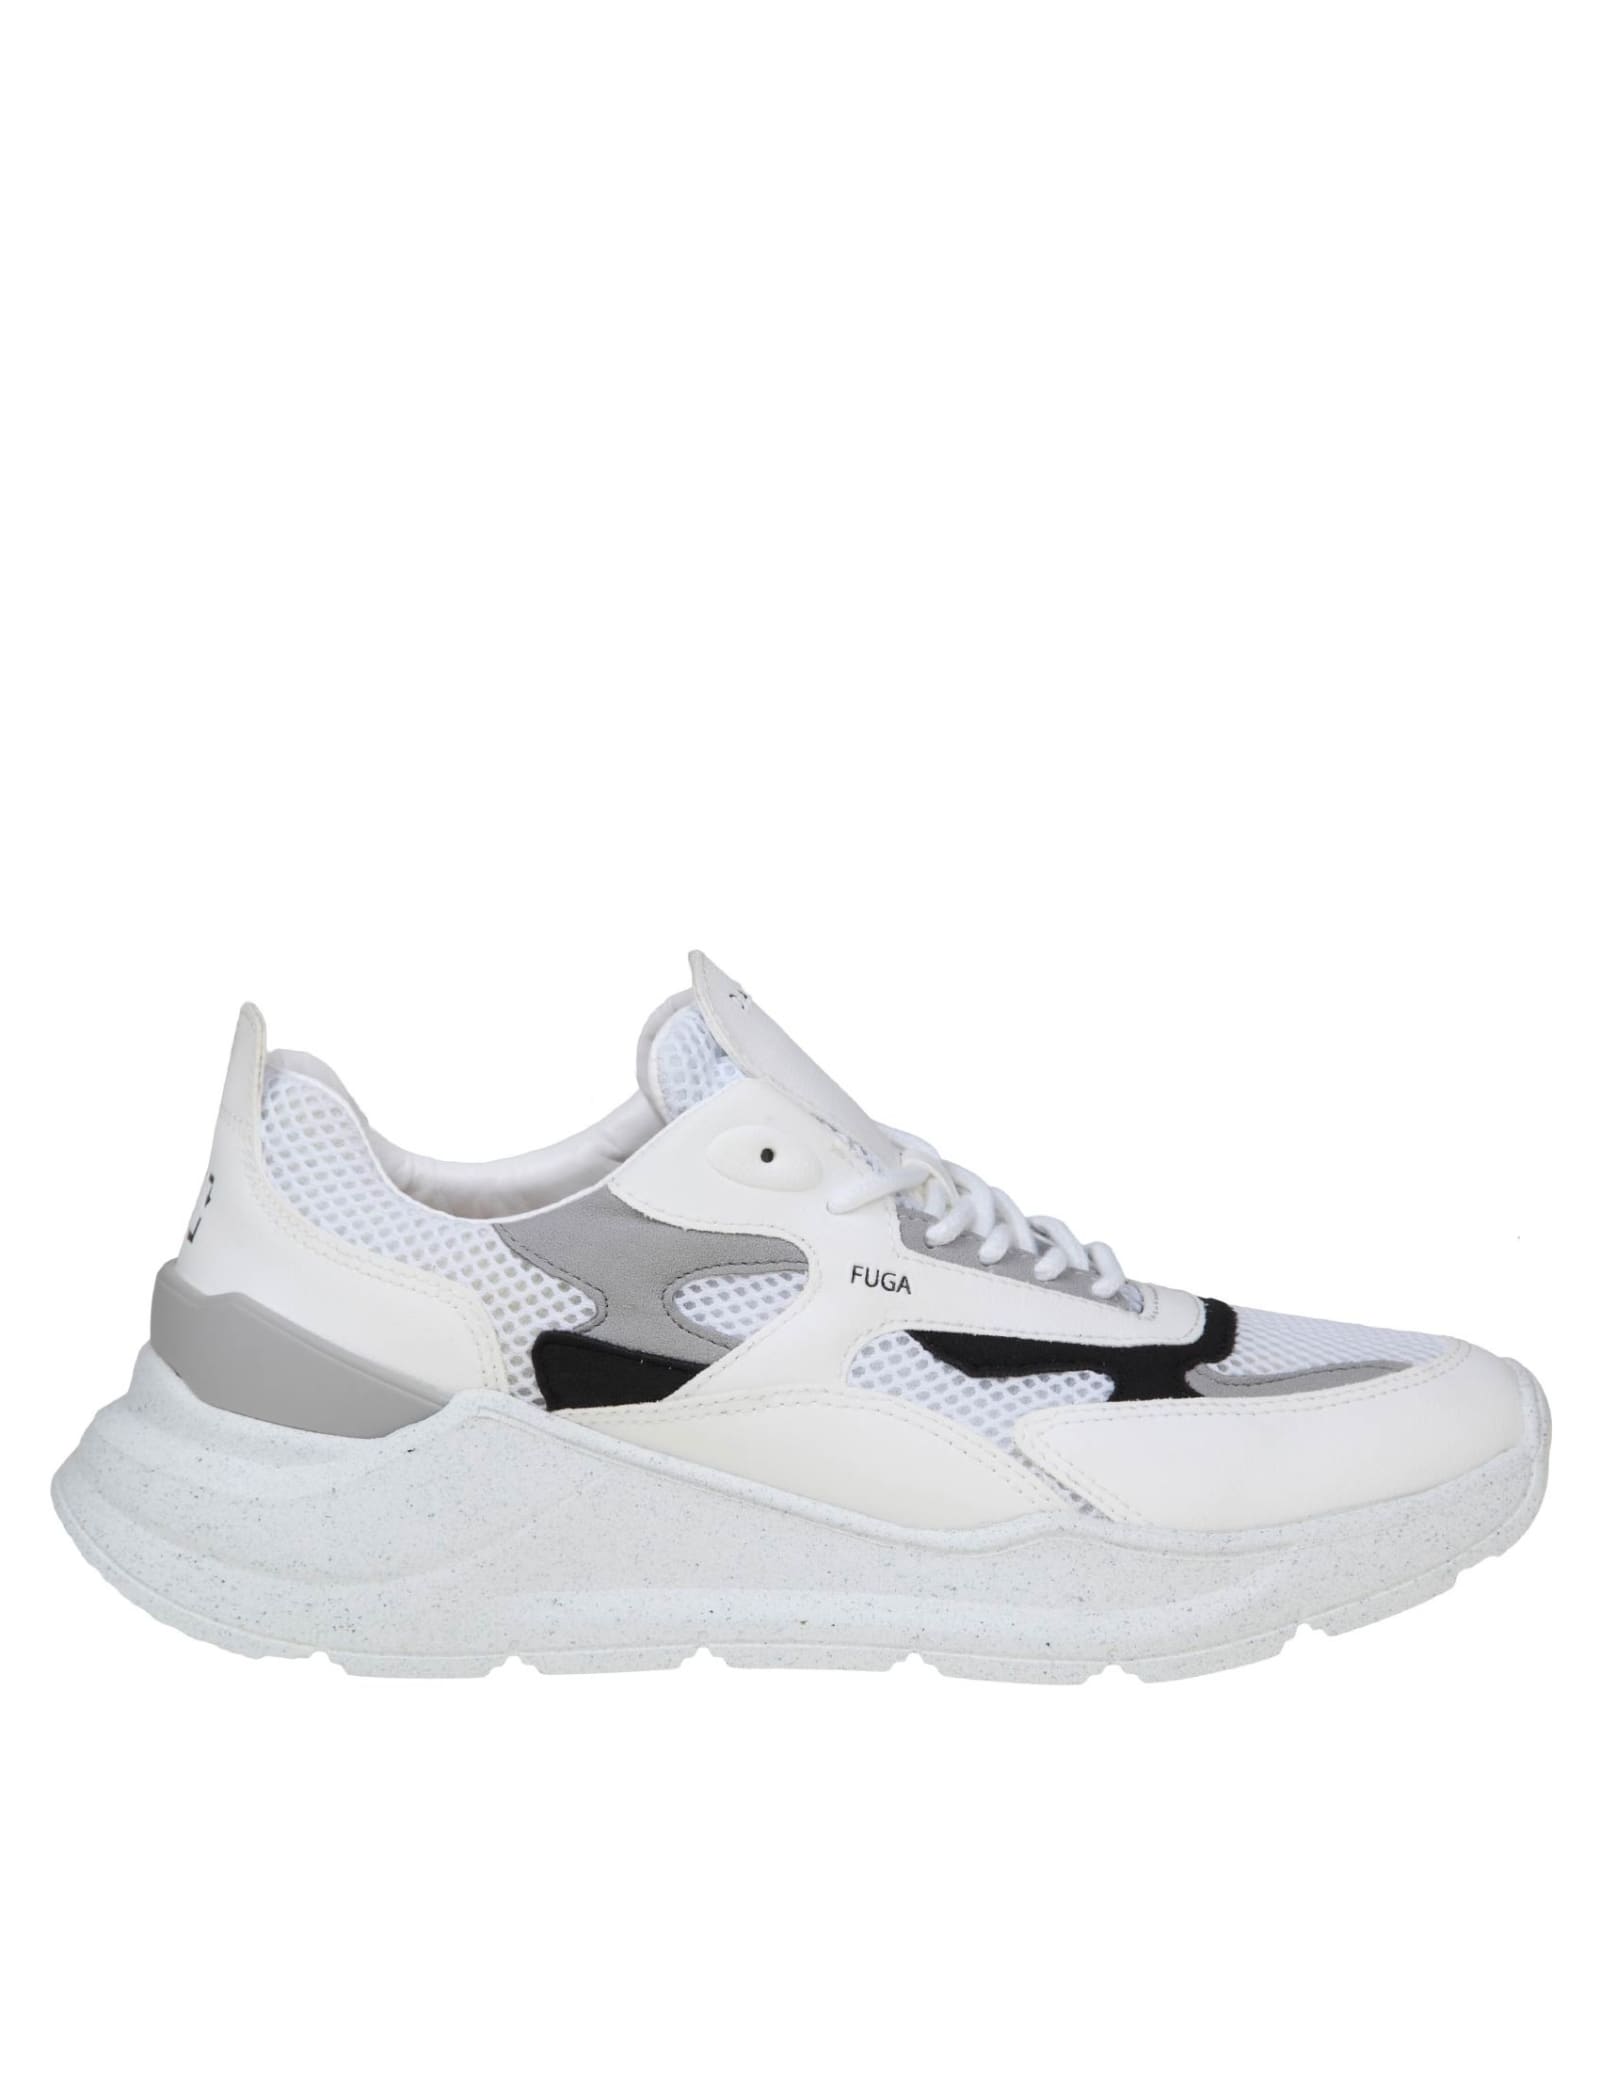 kvælende statsminister Besætte D.a.t.e. Fuga Sneakers In Black/white Leather And Fabric In White/black |  ModeSens